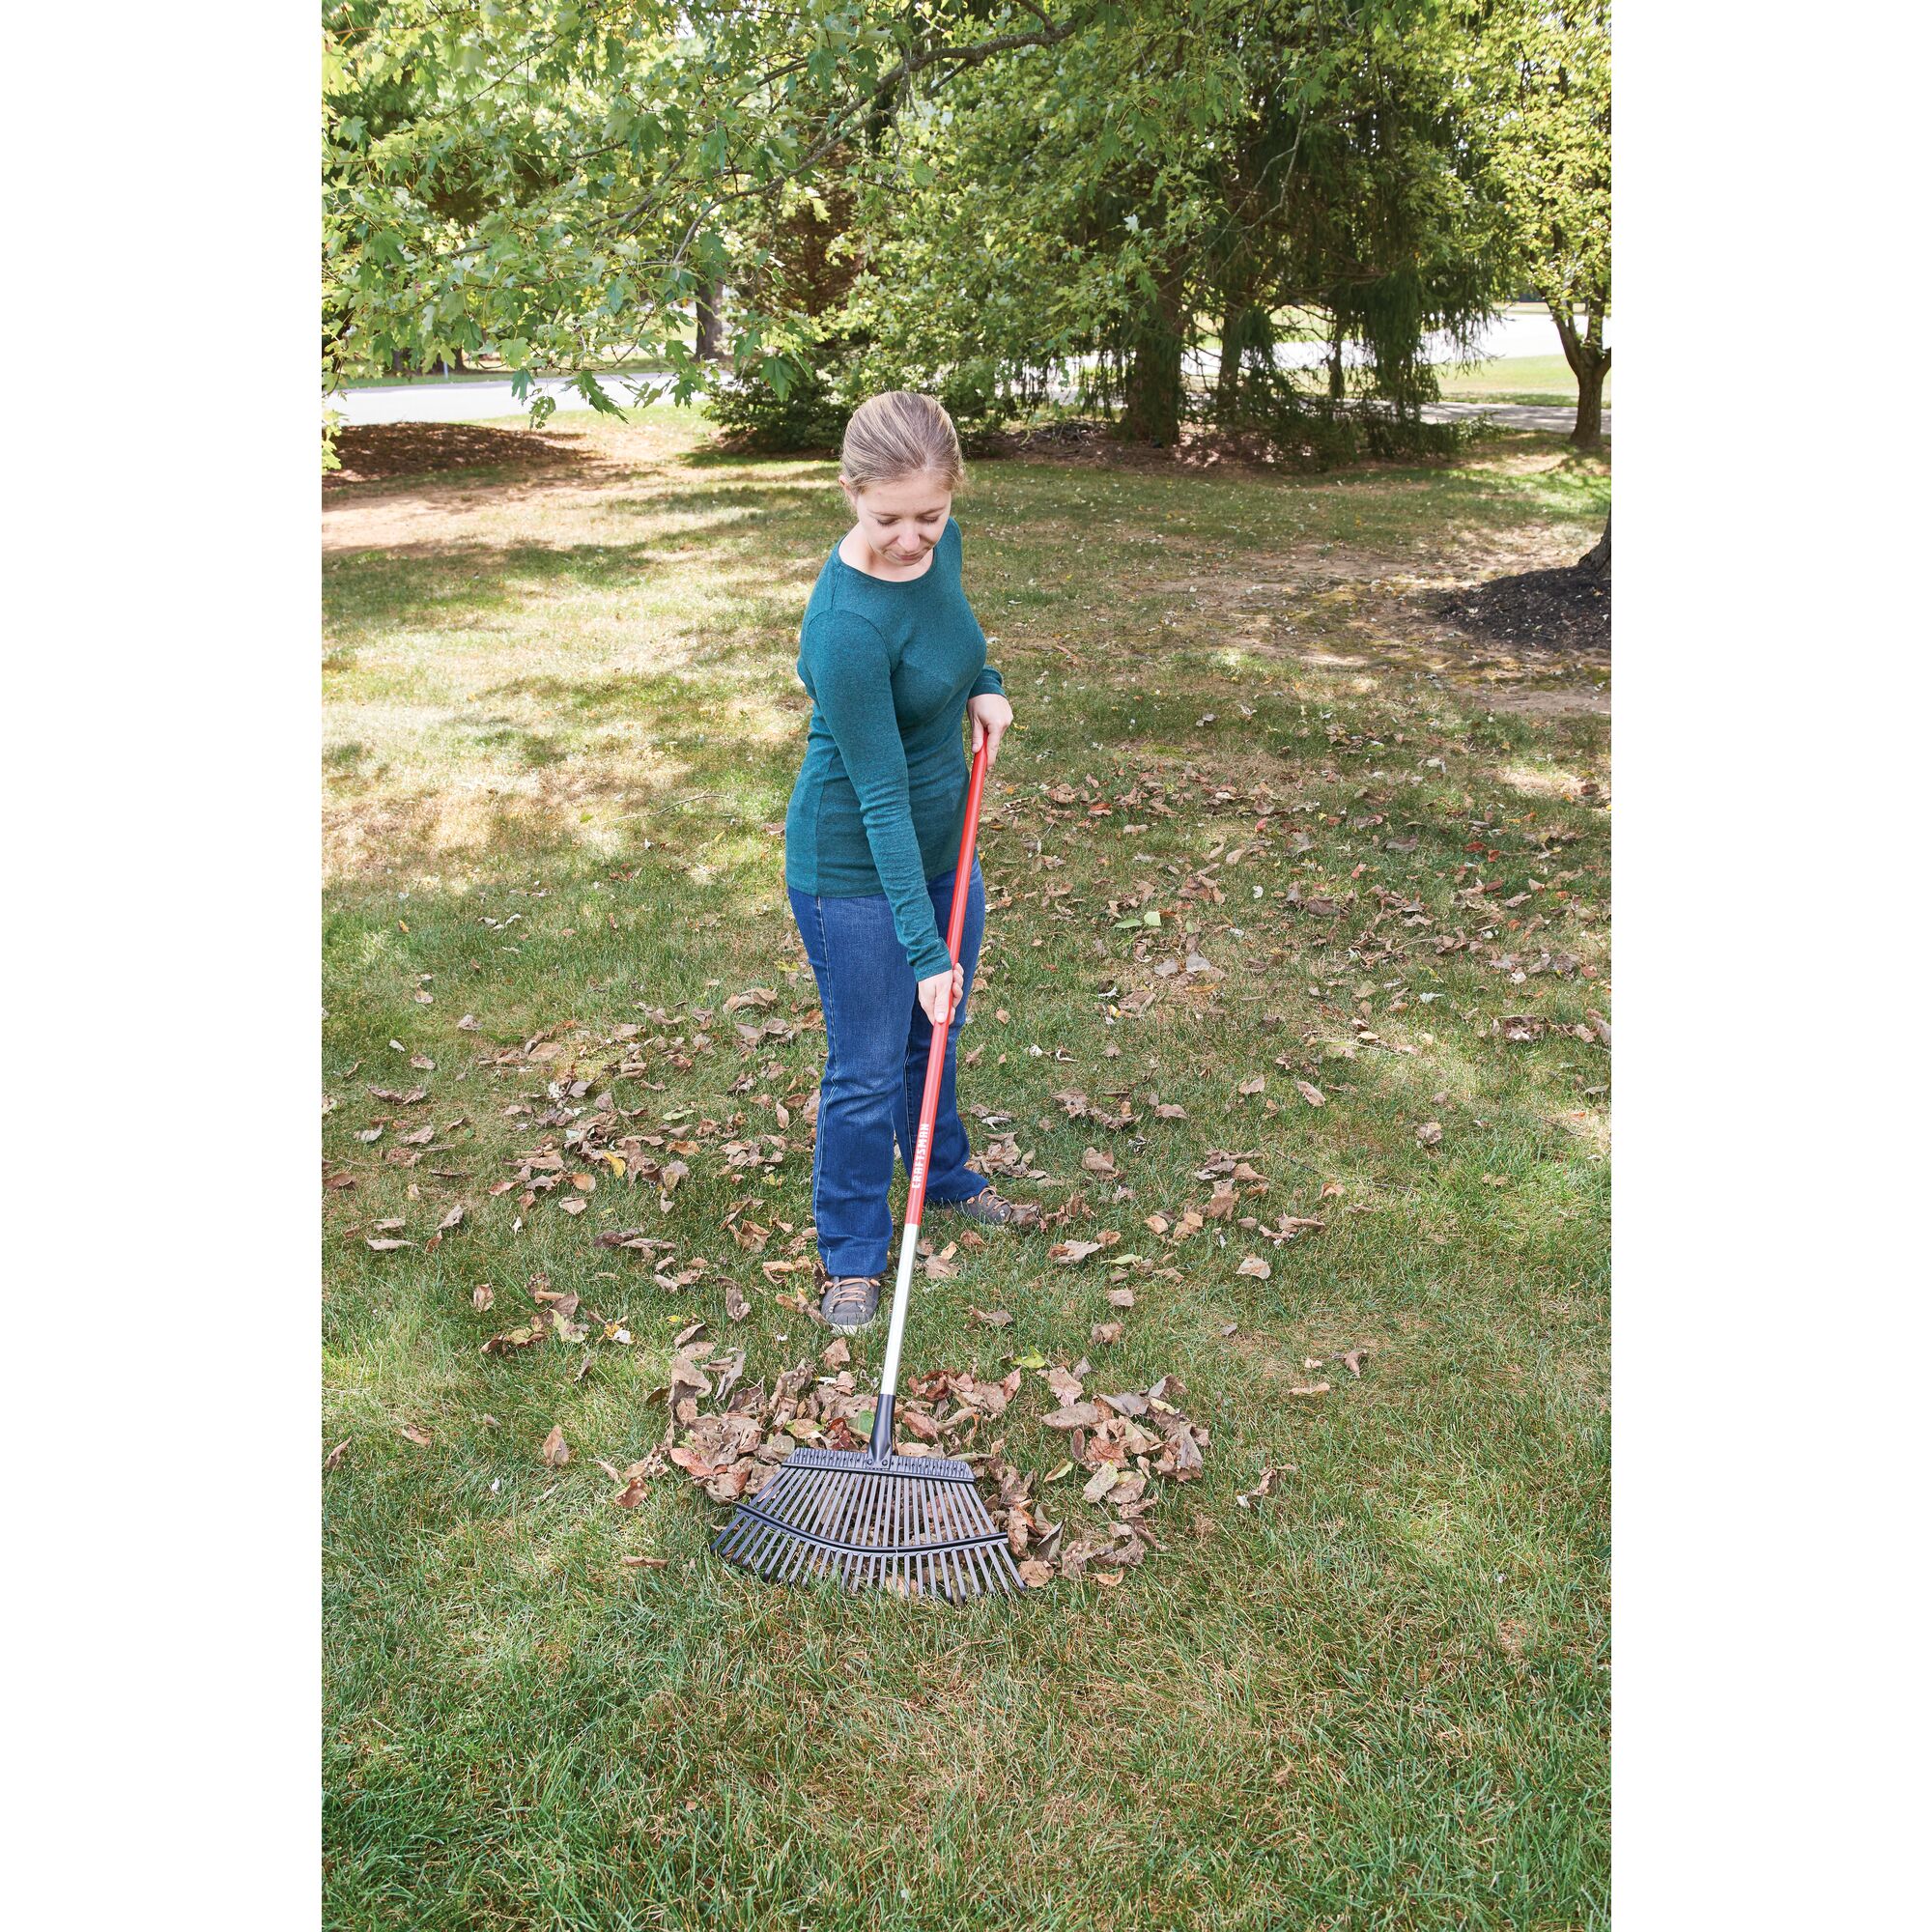 25 tine aluminum handle lawn rake being used by a person to rake leaves from the ground.